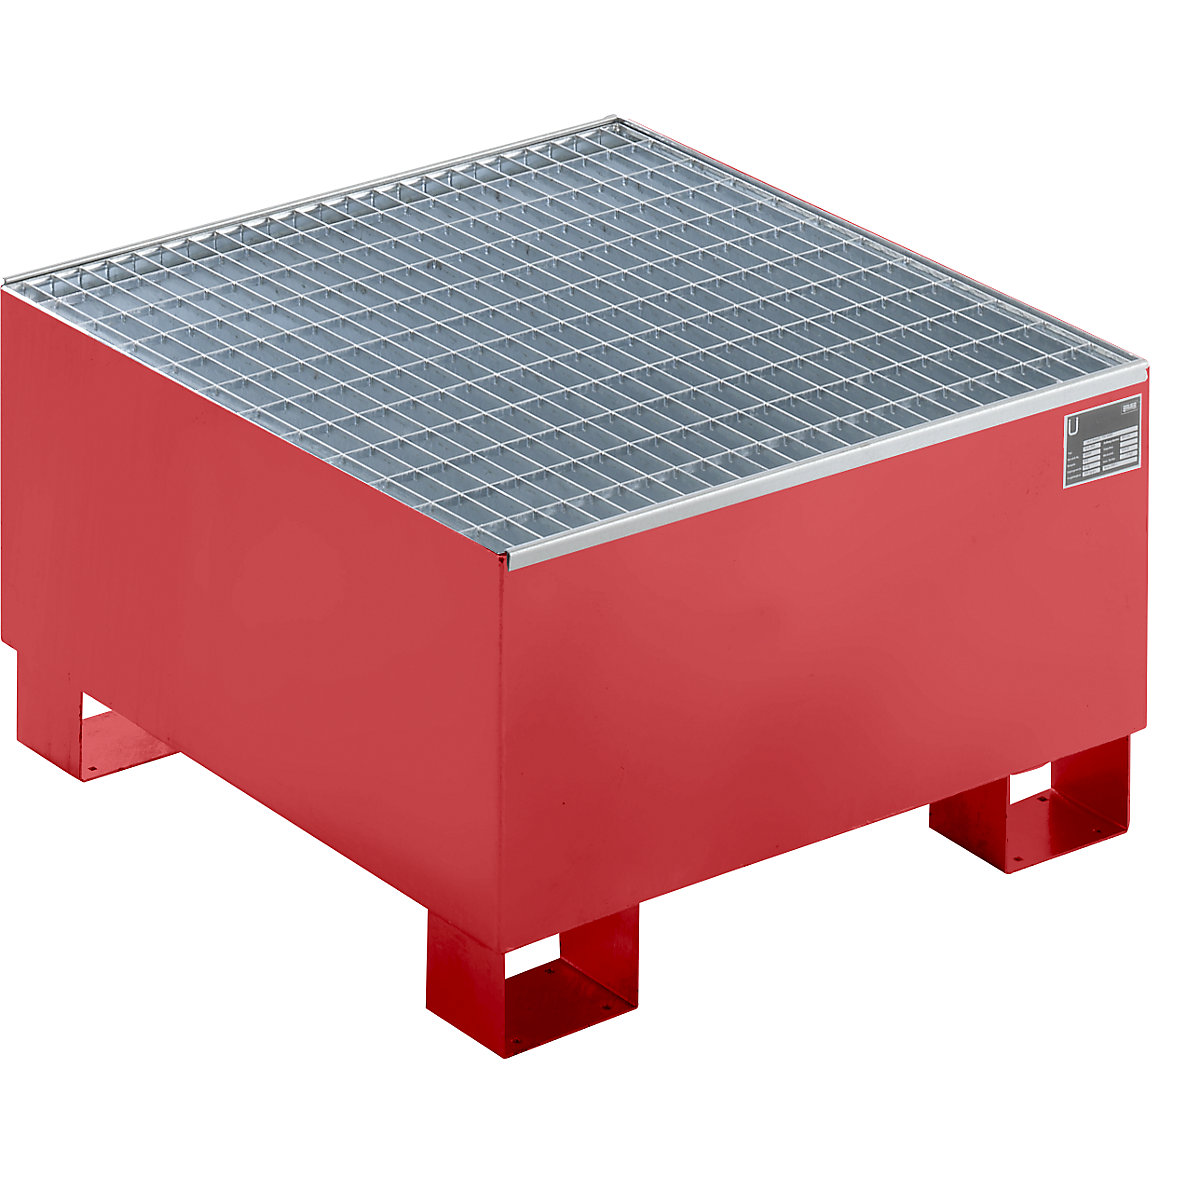 EUROKRAFTbasic – Sump tray made from sheet steel, LxWxH 800 x 800 x 465 mm, red RAL 3000, with grate